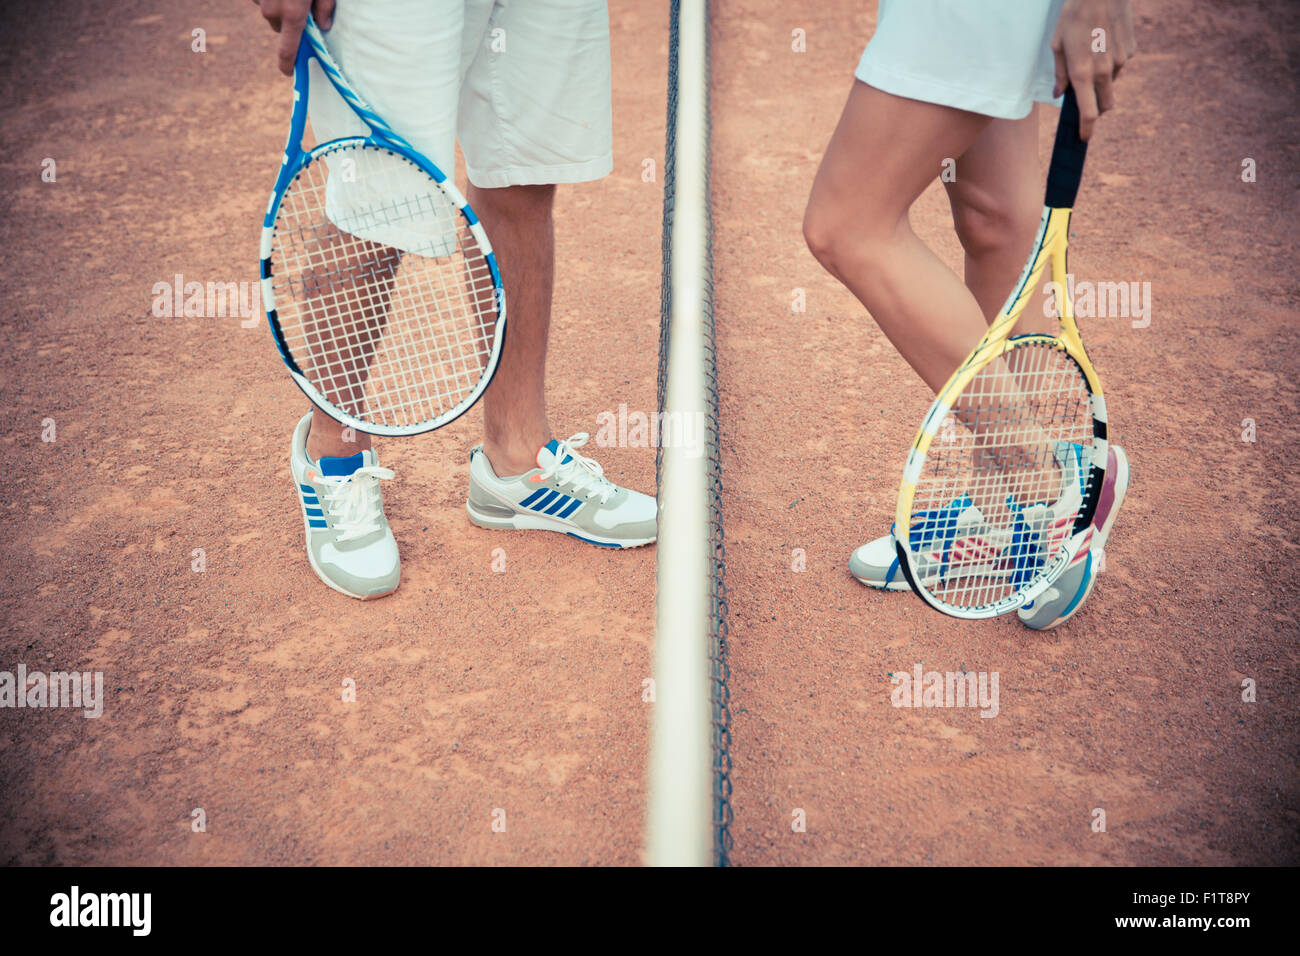 Closeup portrait of female and male legs at the tennis court Stock Photo